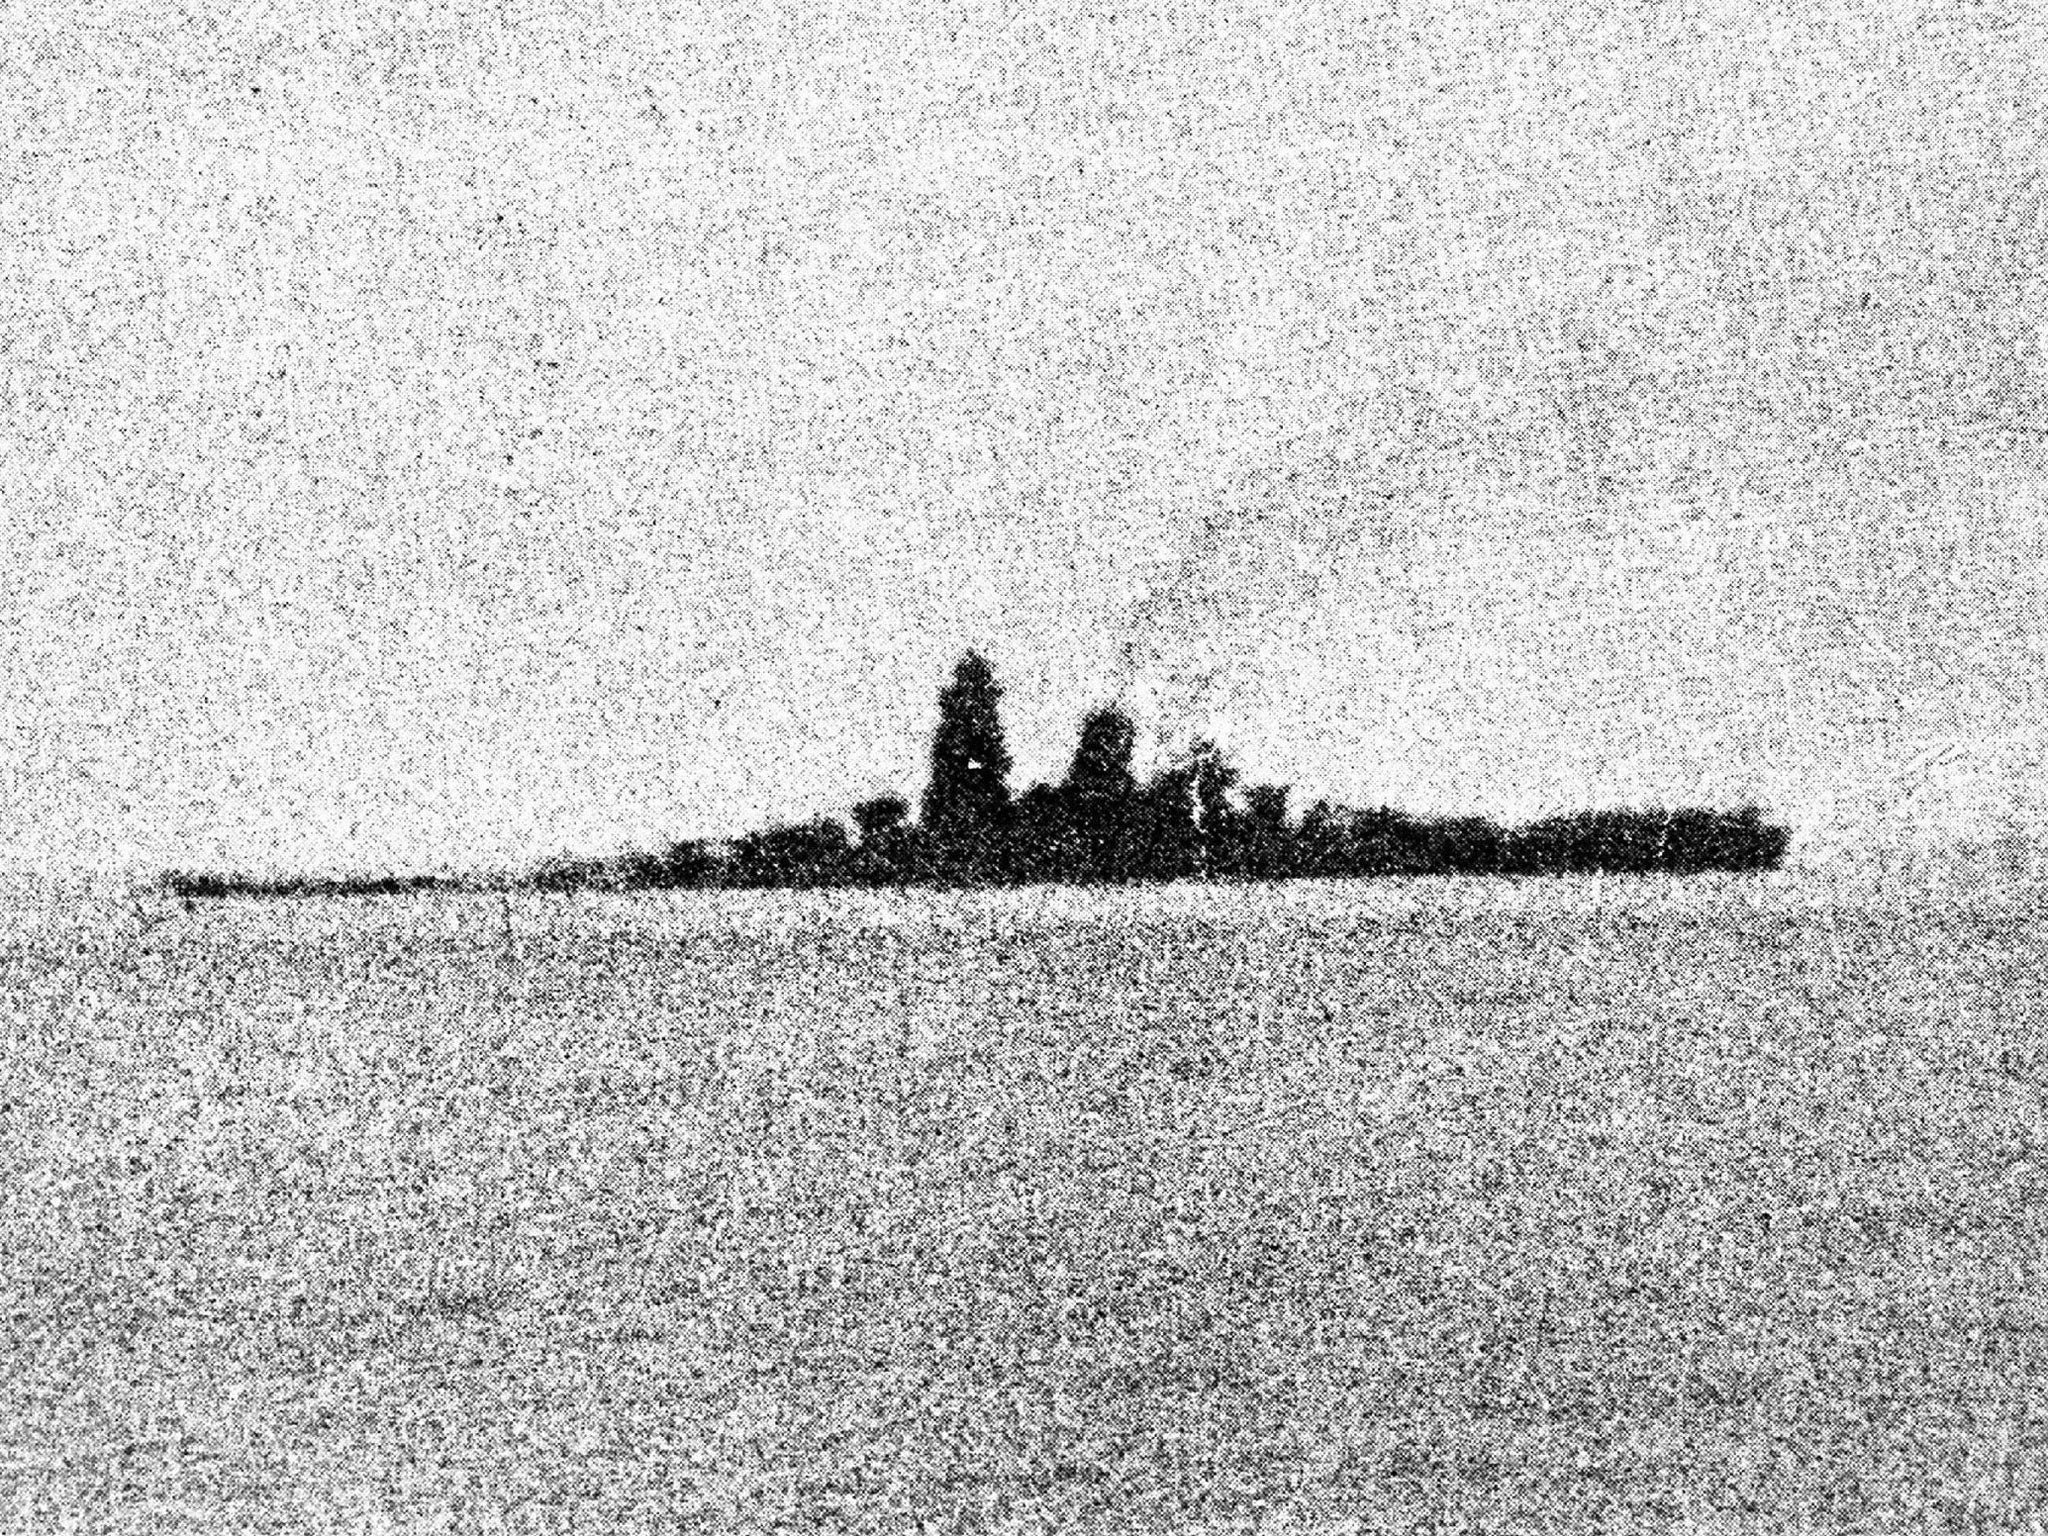 An October 1944 image of the Japanese battleship Musashi which sank in the Sibuyan Sea in the Philippines after coming under fire from US forces